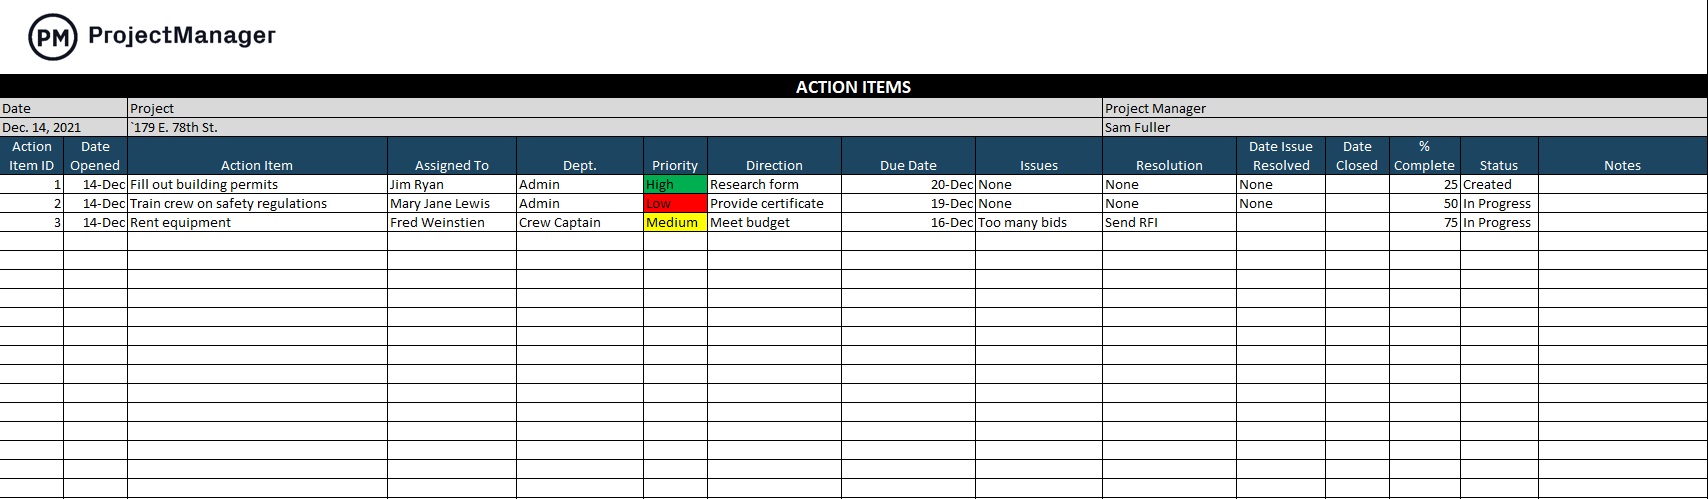 ProjectManager's action items template